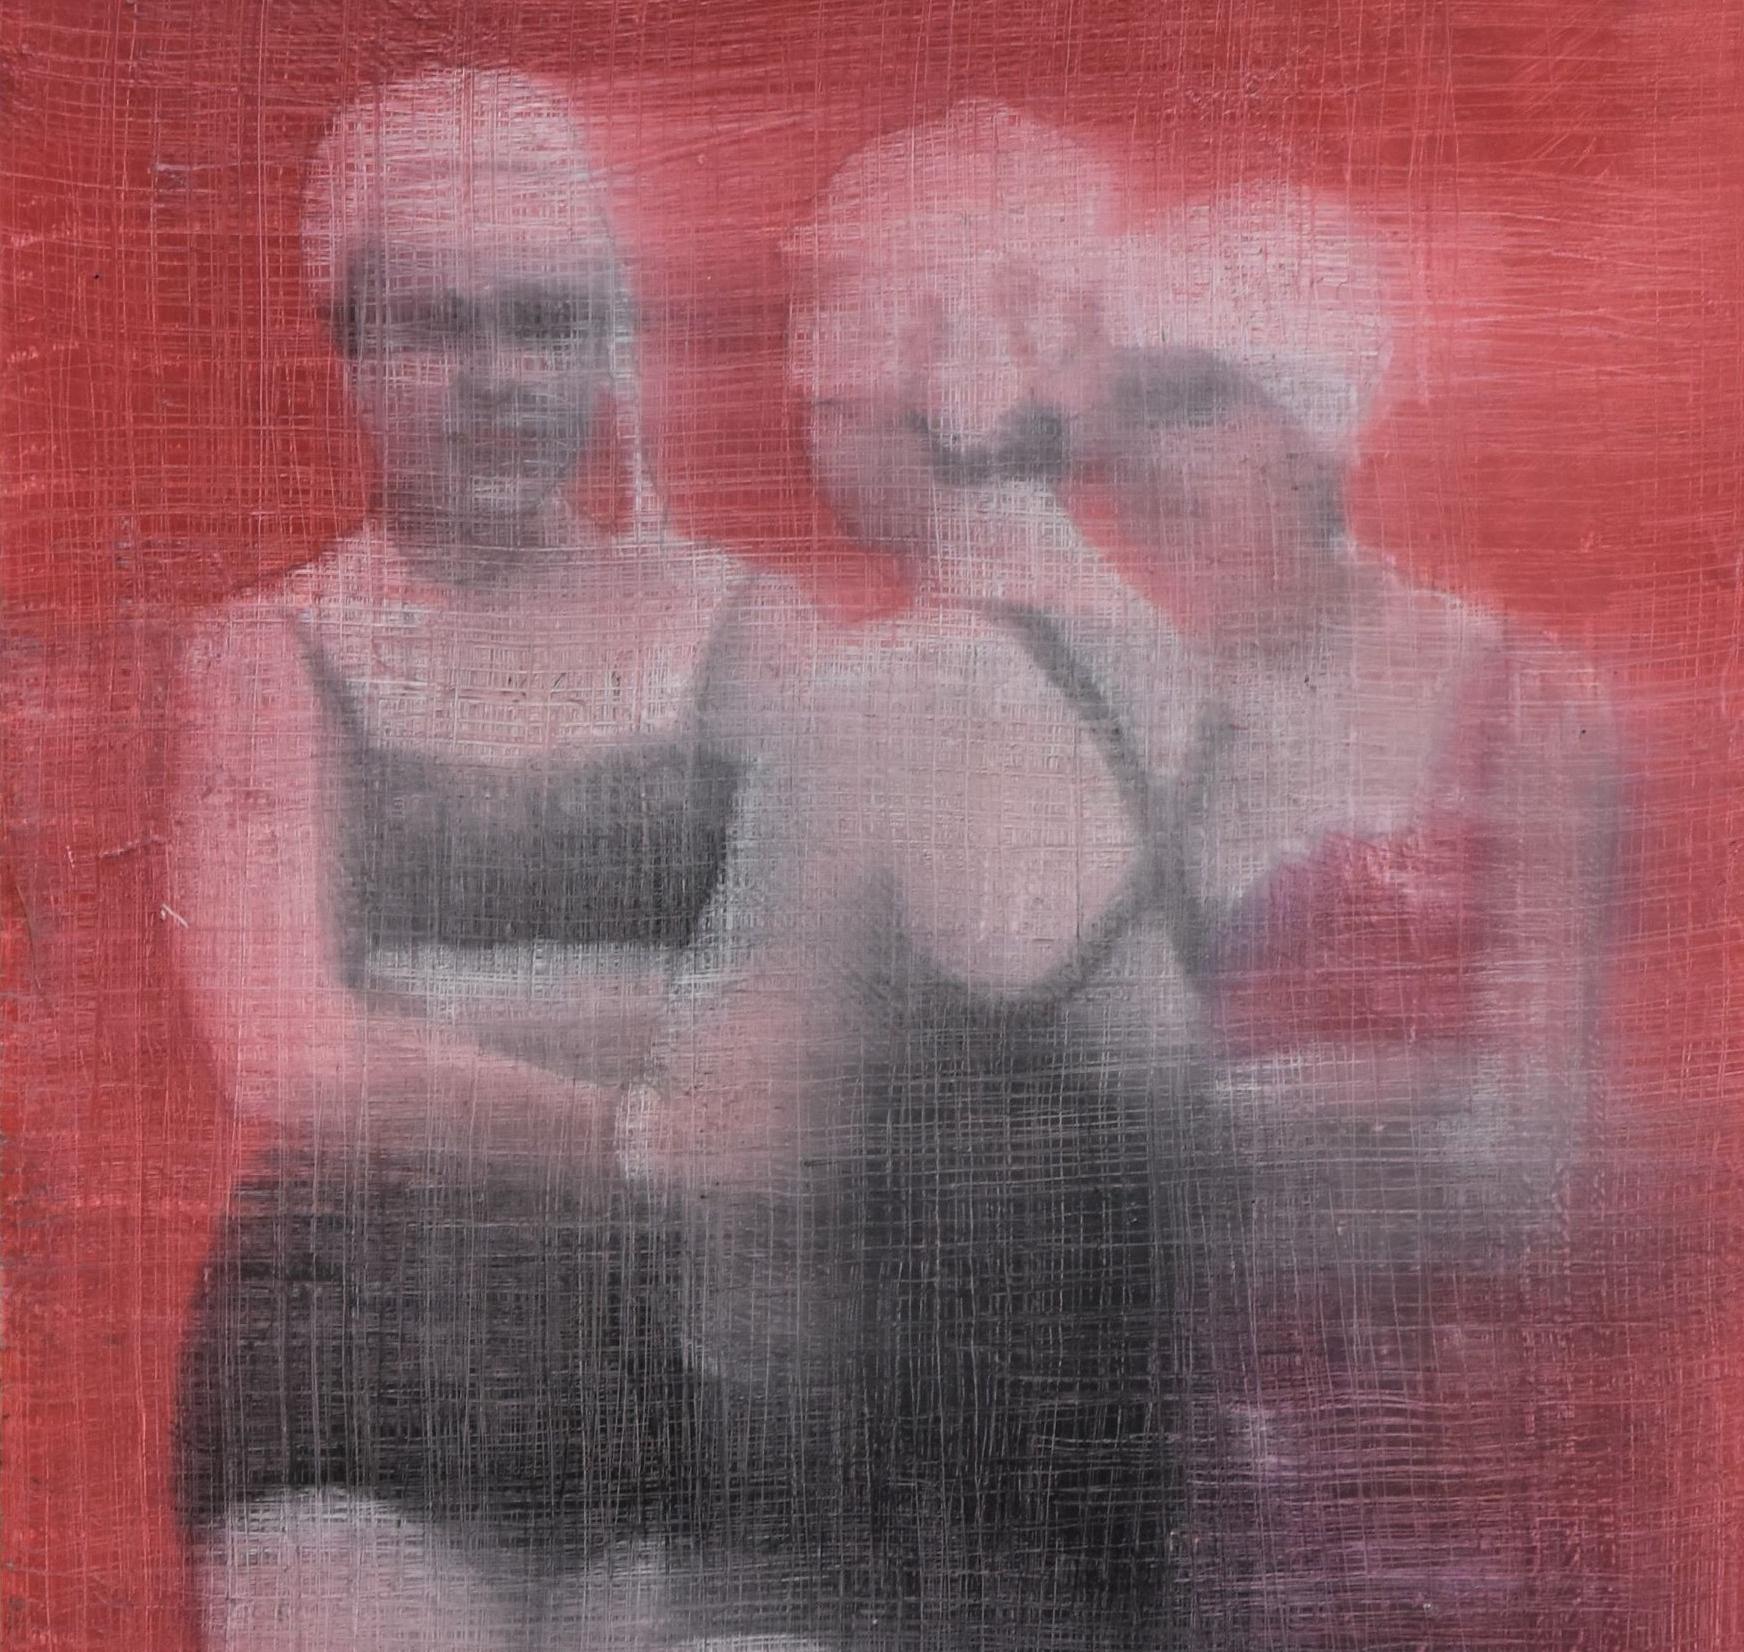 LOOK FOR FREE SHIPPING AT CHECKOUT. IF NOT AVAILABLE, GALLERY OFFERS FREE SHIPPING.
ARTIST EXPLANATION OF THE PAINTINGS:
Bathers: 12 x 9 oil on cradled birch panel. Ready to hang with wire on the back
They are blurred. So I paint them with a regular